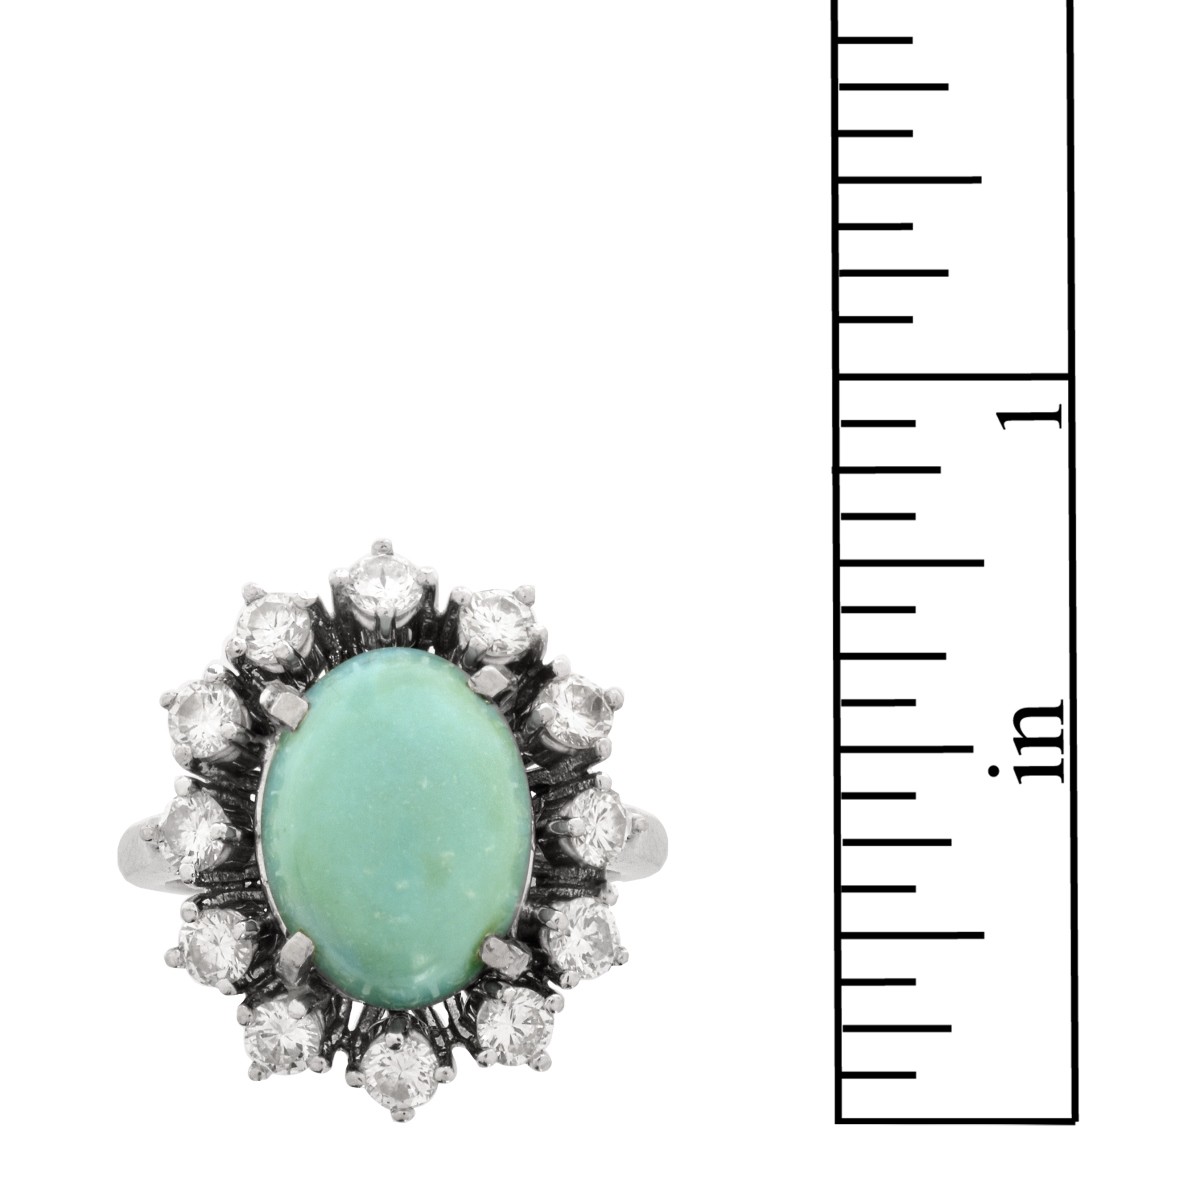 Turquoise, Diamond and 14K Ring